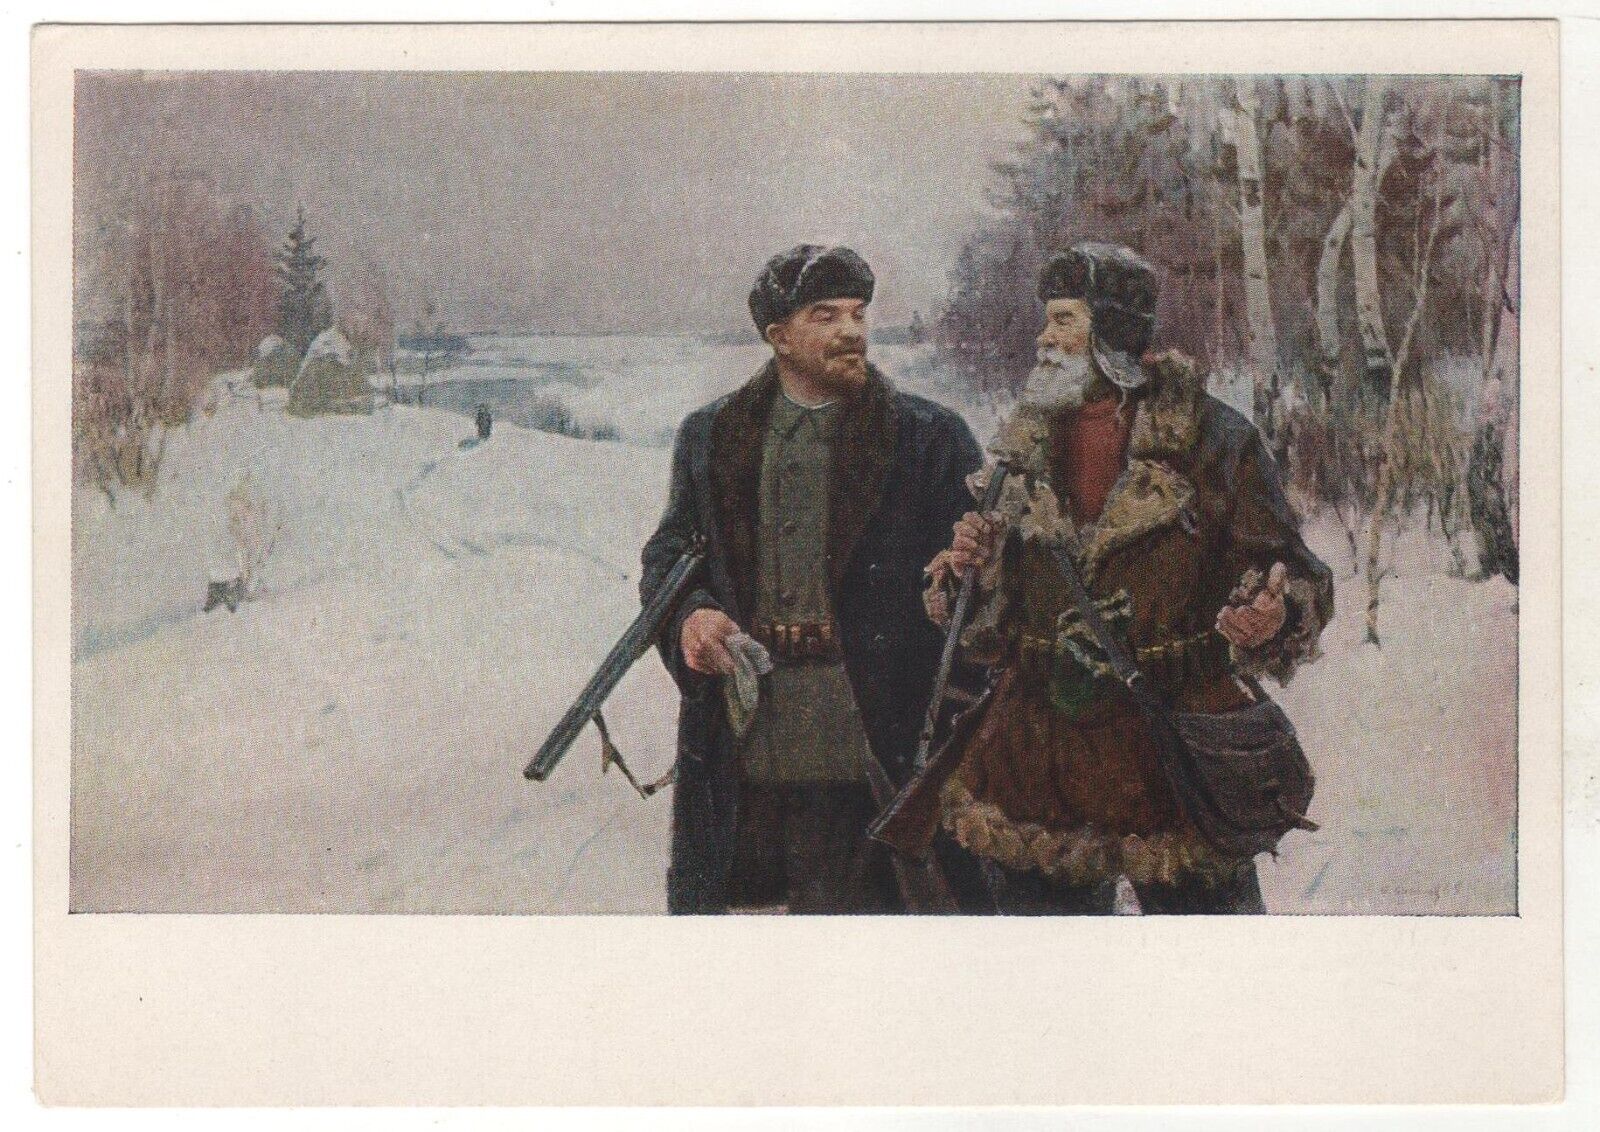 1966 LENIN on the hunt & a man with a gun Hunting ART OLD Russian Postcard USSR